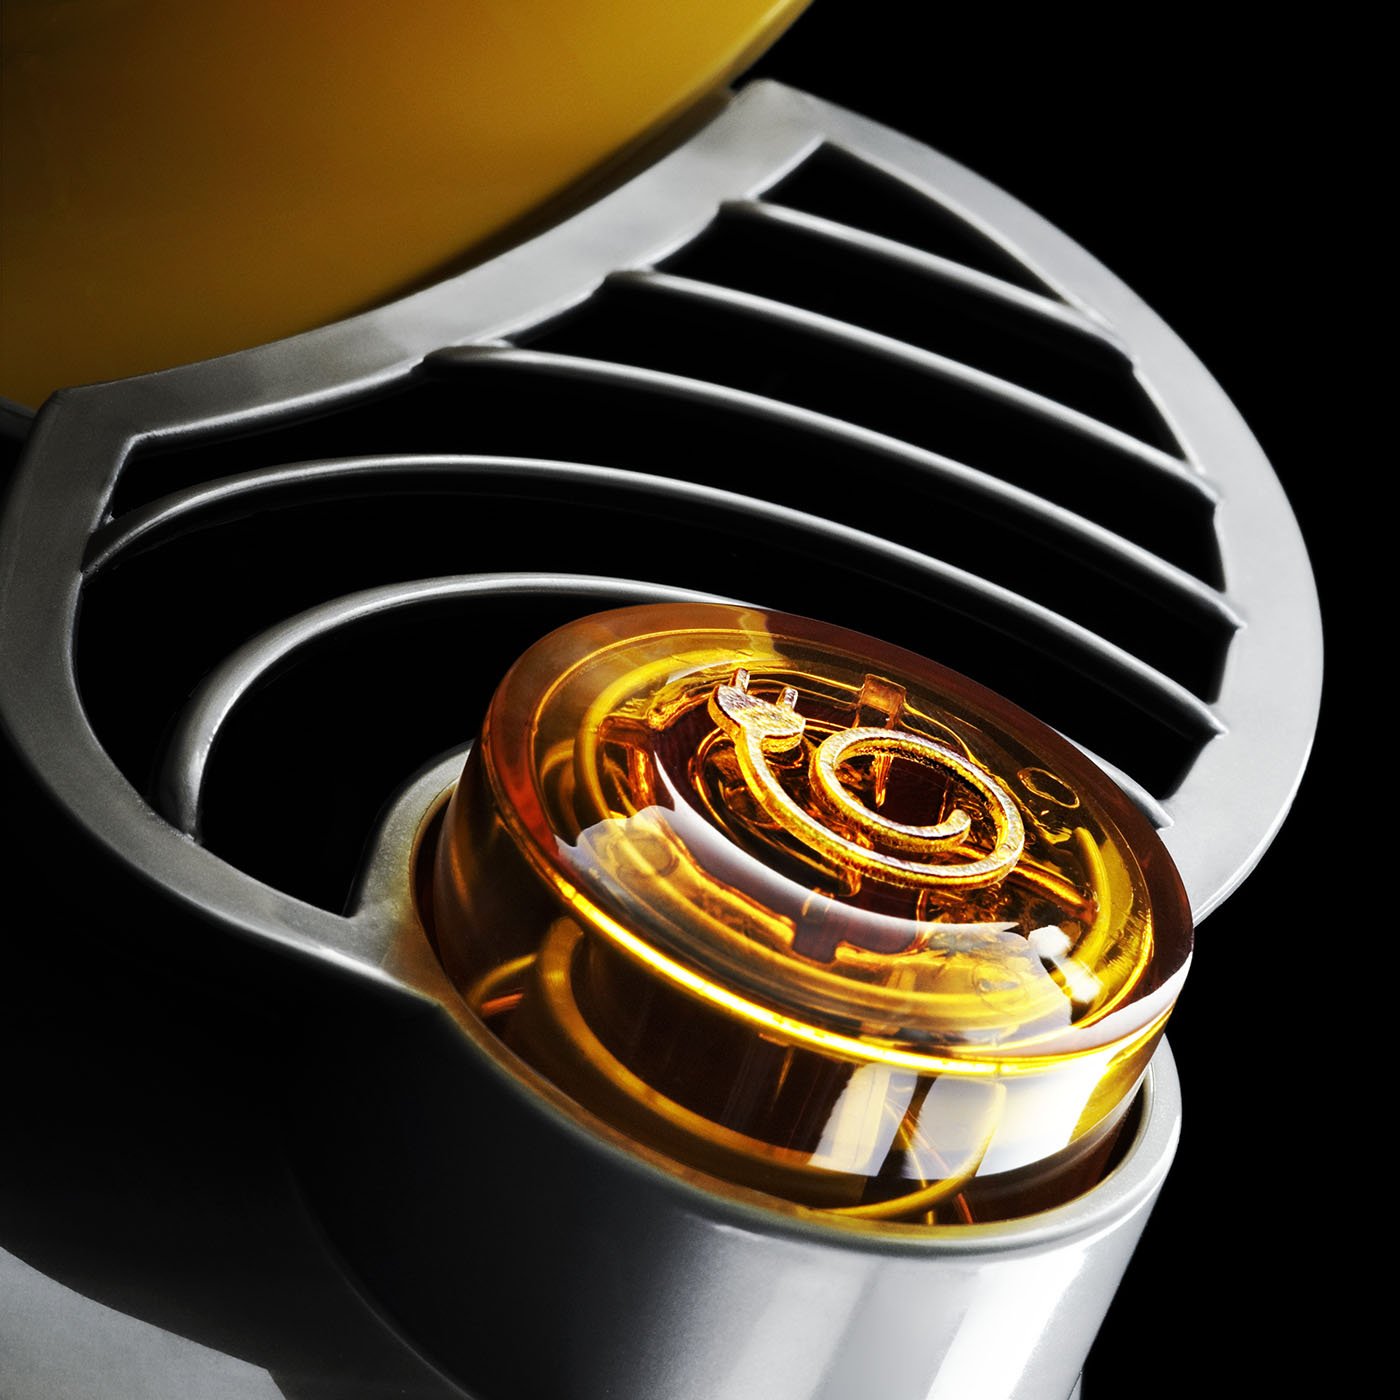  A Detailed close up photograph of a Dyson Vacuum cleaner photographed on a black back ground creating an abstract shape. 